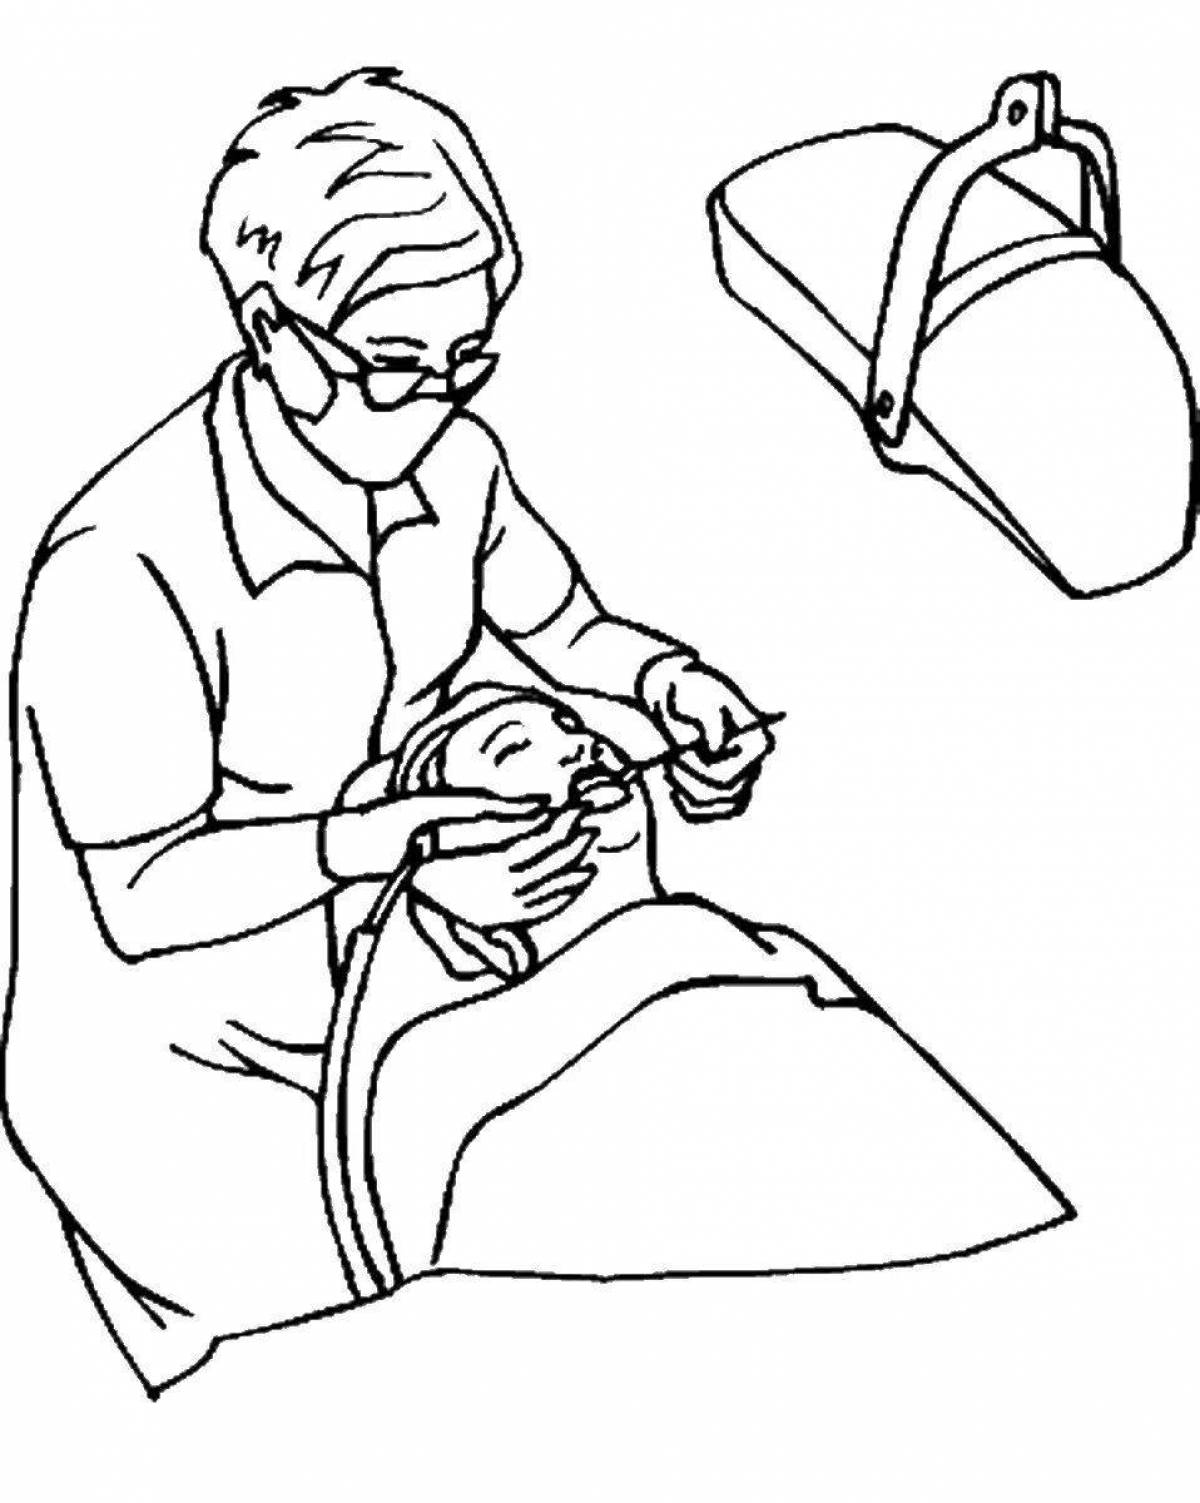 Bright dentist coloring page